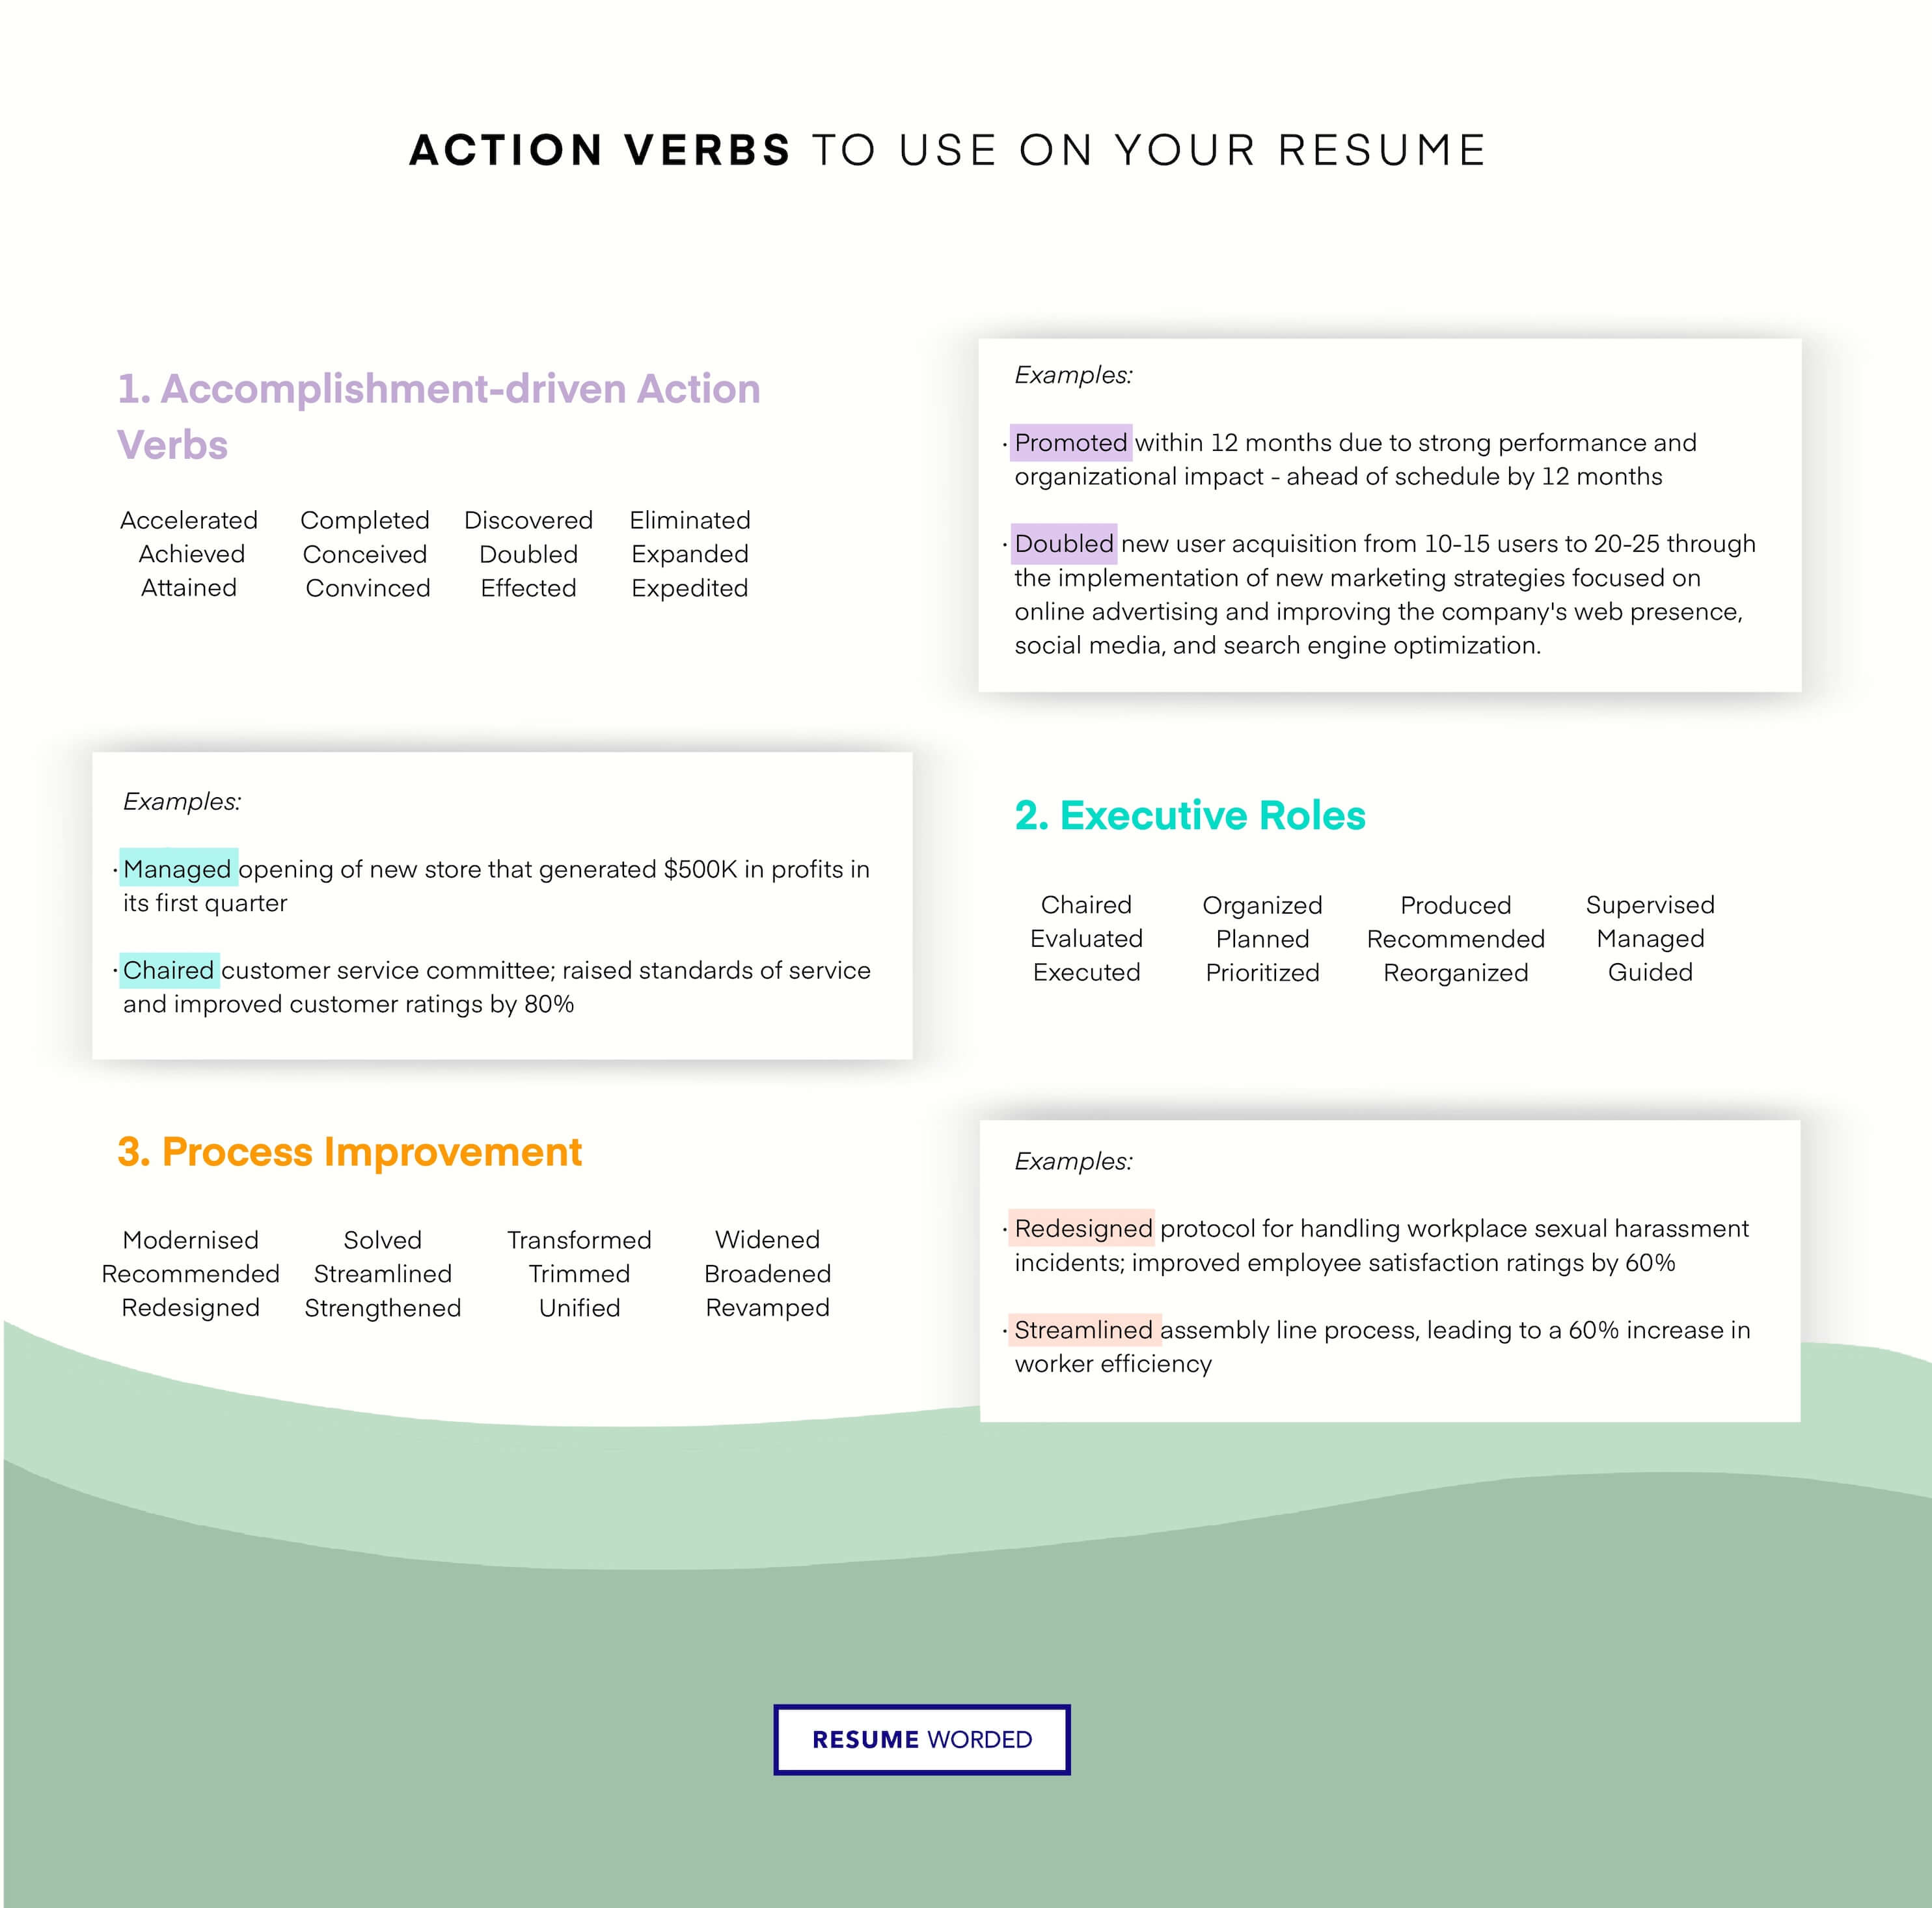 Use action verbs to indicate experience in your three main functions. - Lead Dental Assistant Resume